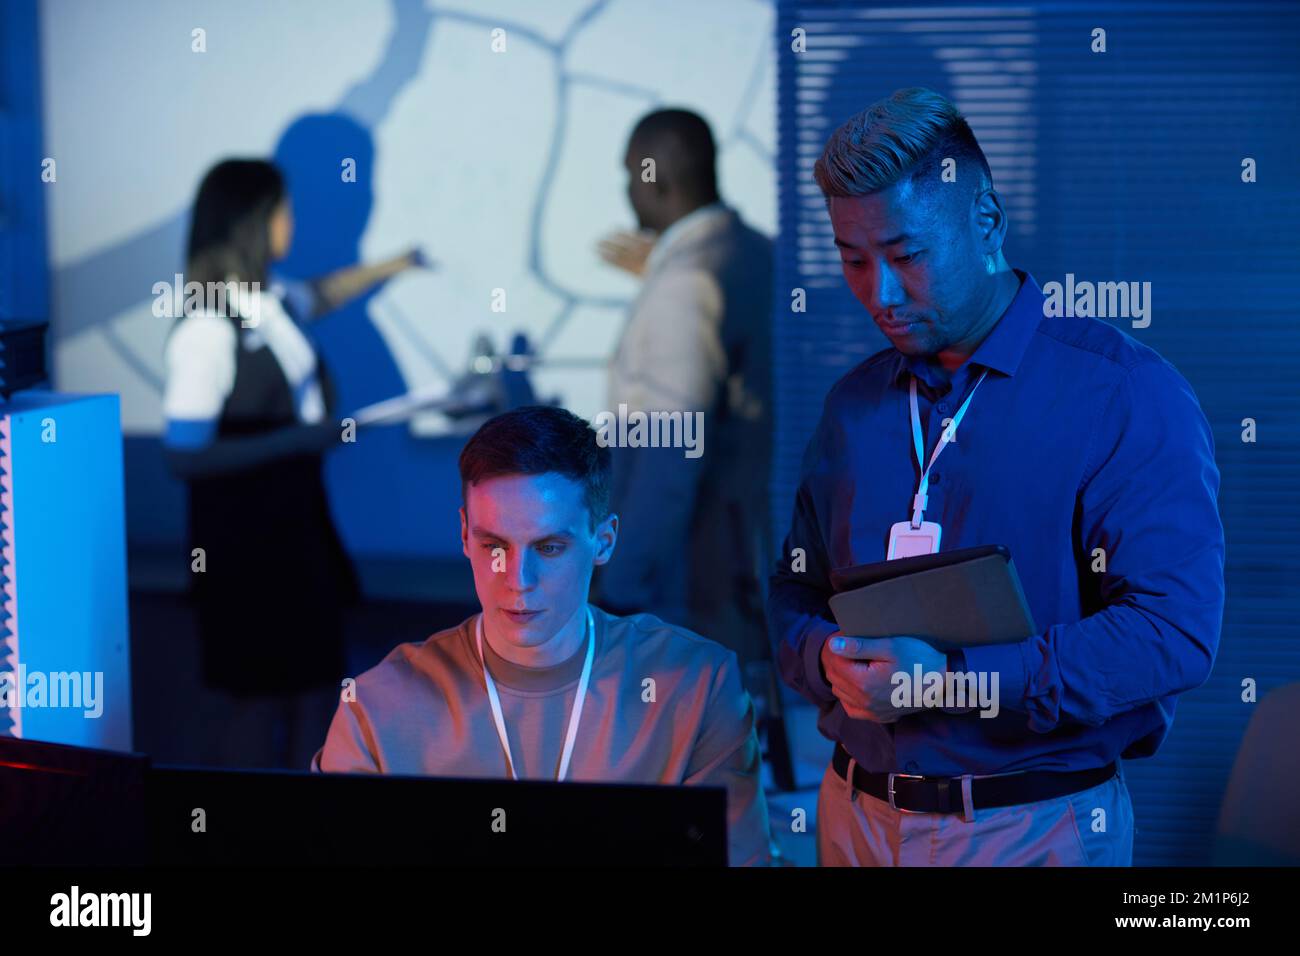 Portrait of two people working in mission control center with futuristic blue and red tones Stock Photo